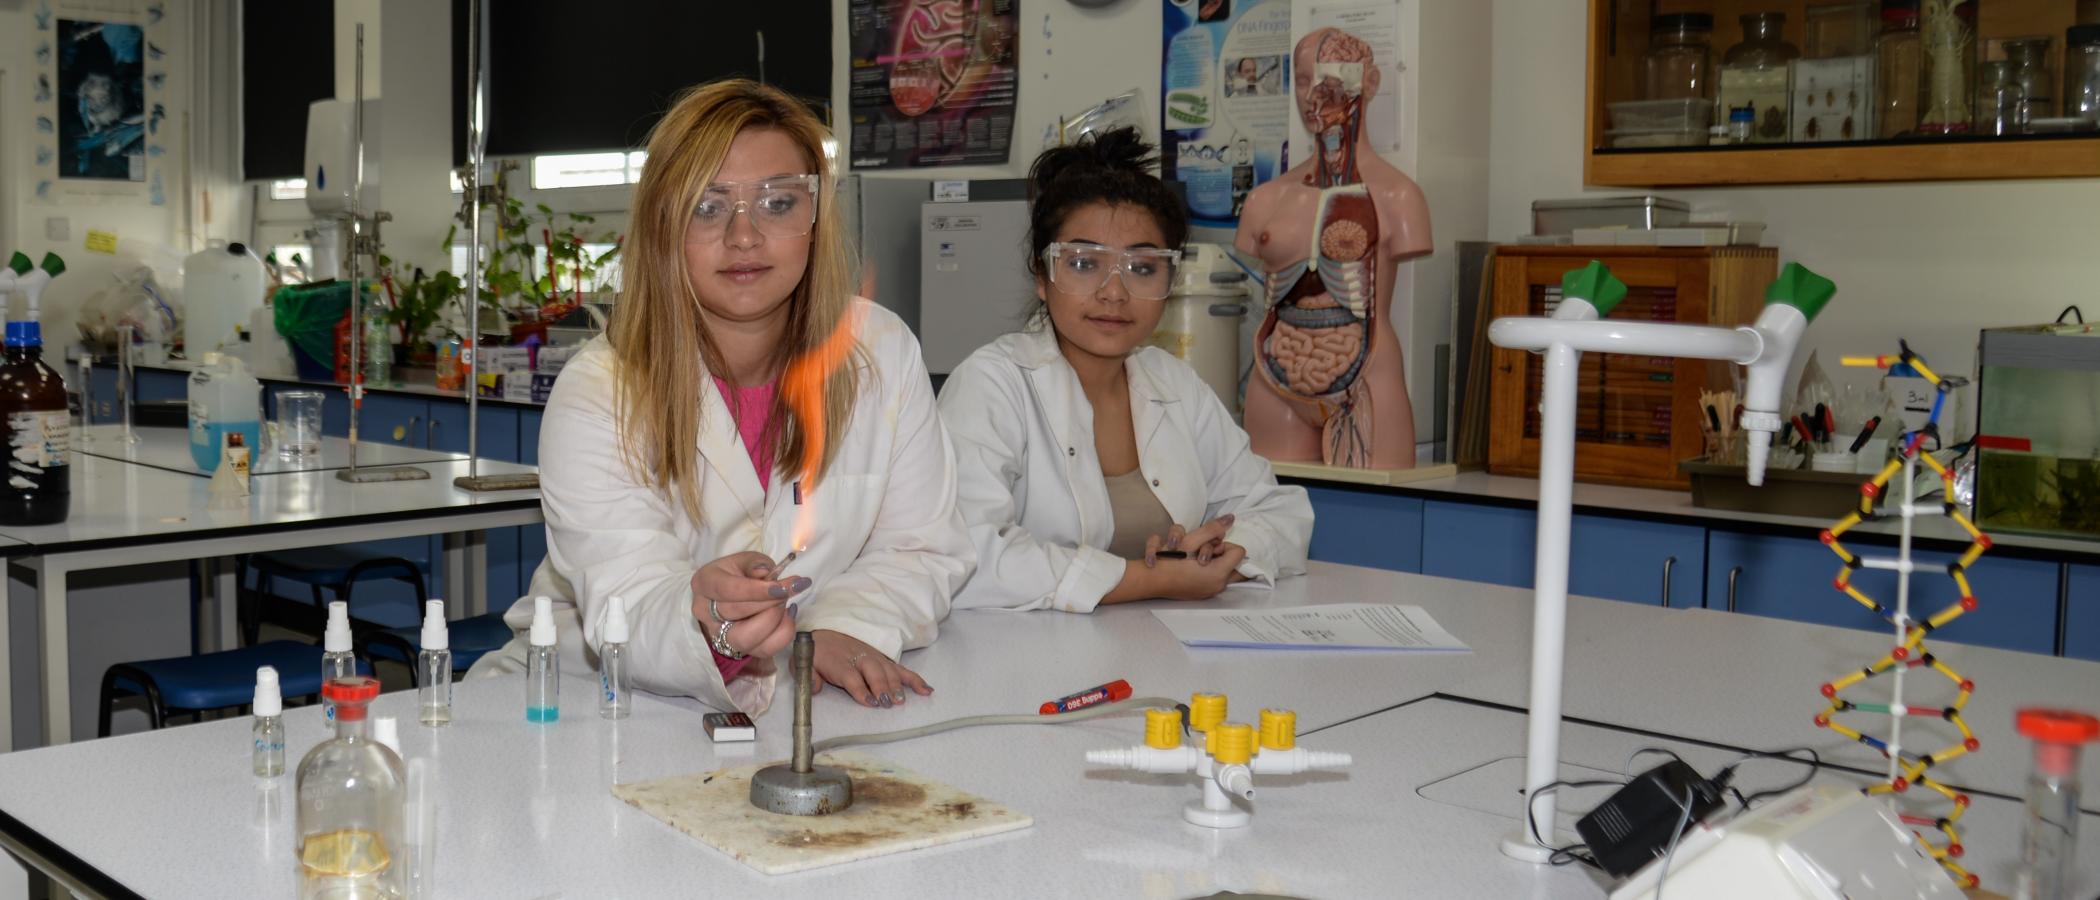 Apprenticeships lead to careers in science